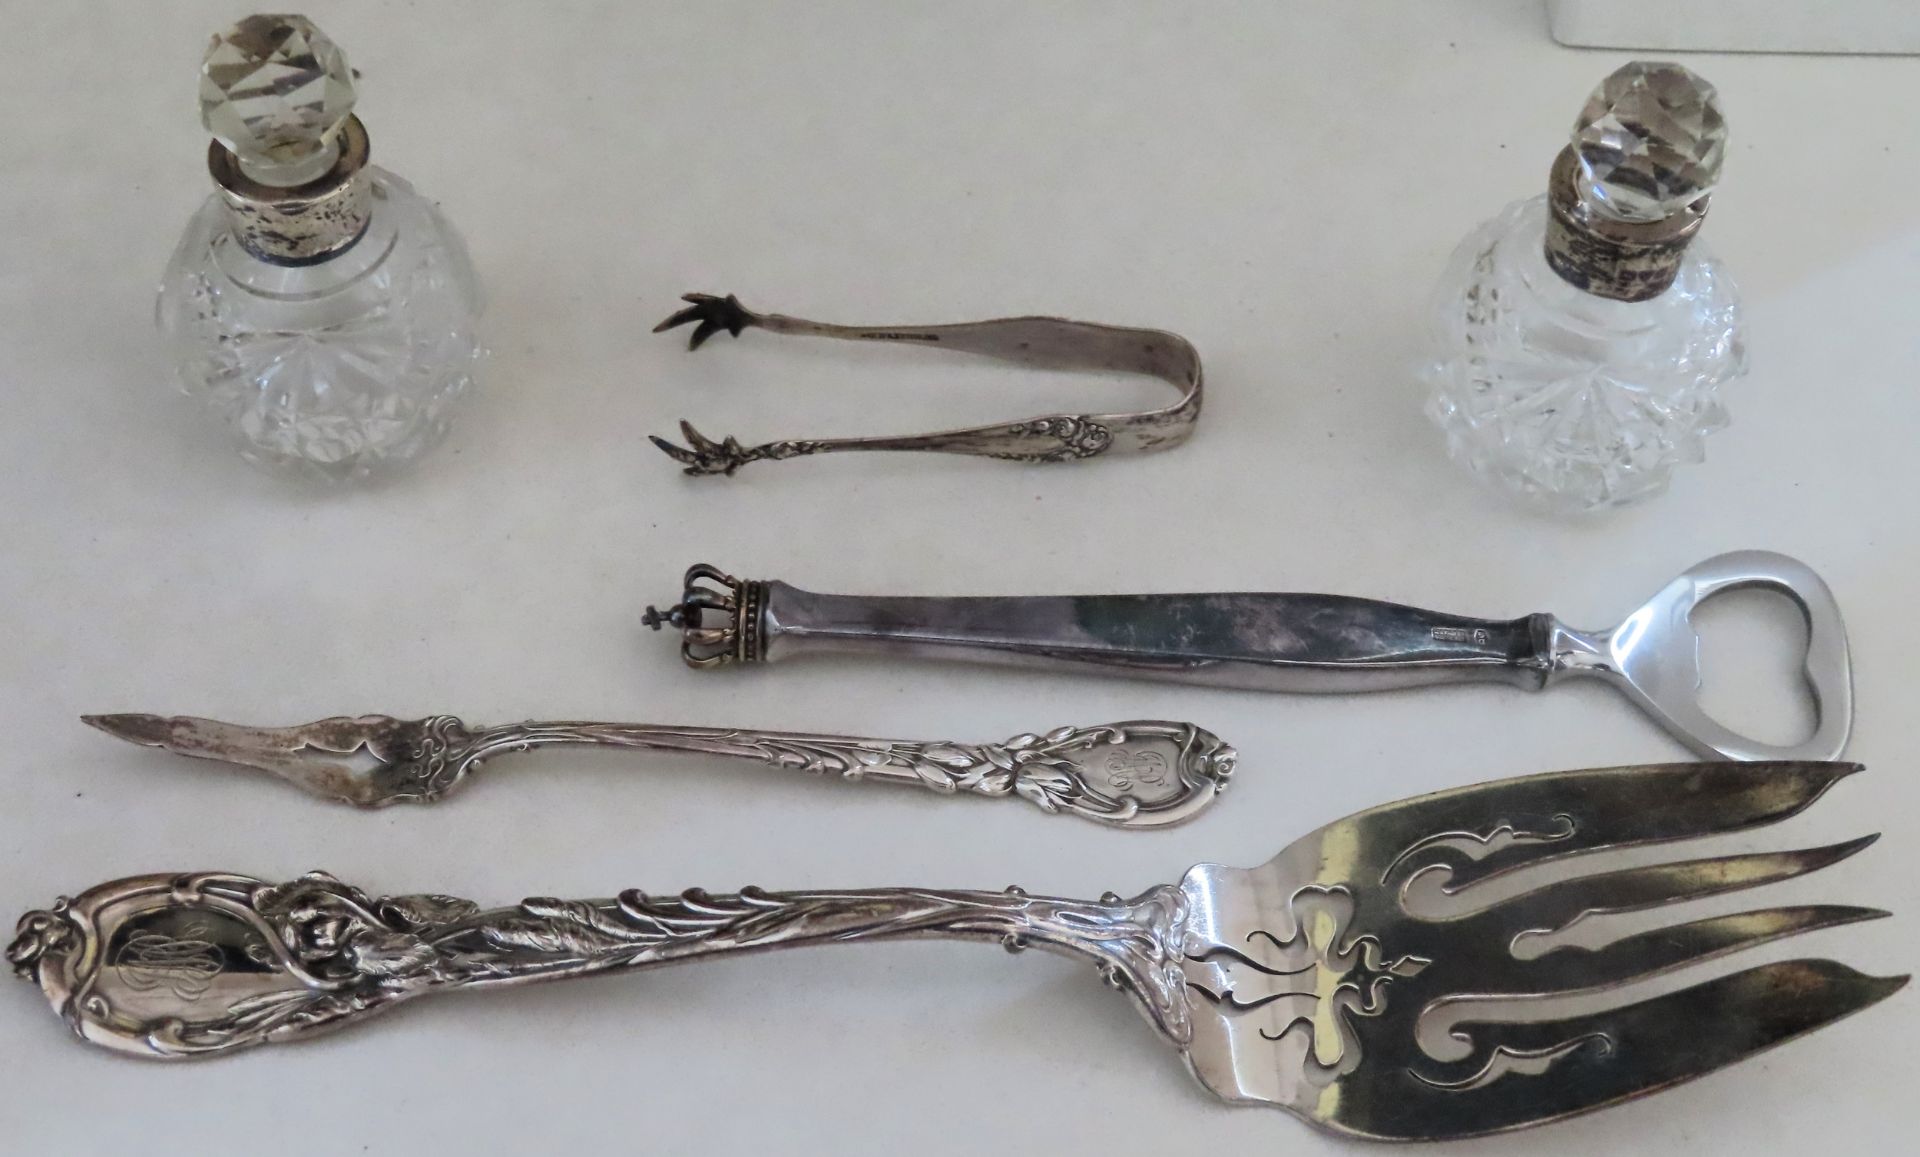 Sundry lot of silver items Inc. small decanters, Sterling Denmark opener, other silver flatware, etc